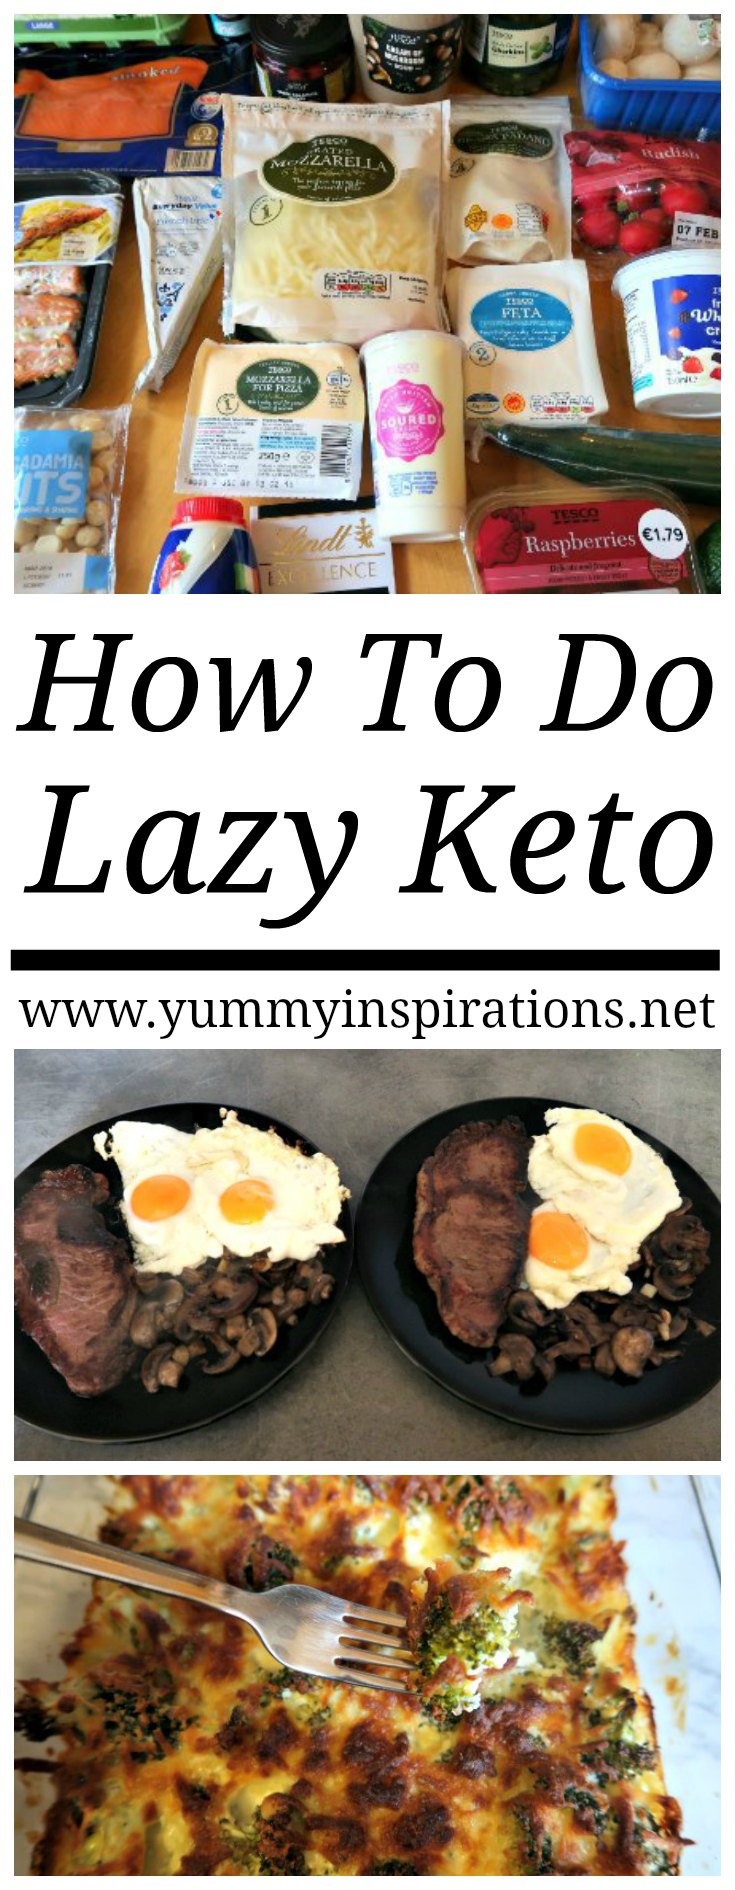 How To Do Lazy Keto - What is Lazy Keto? Cooking Lazy Keto Meals. My definition of Lazy Keto and how I get results without following a strict Ketogenic Diet.